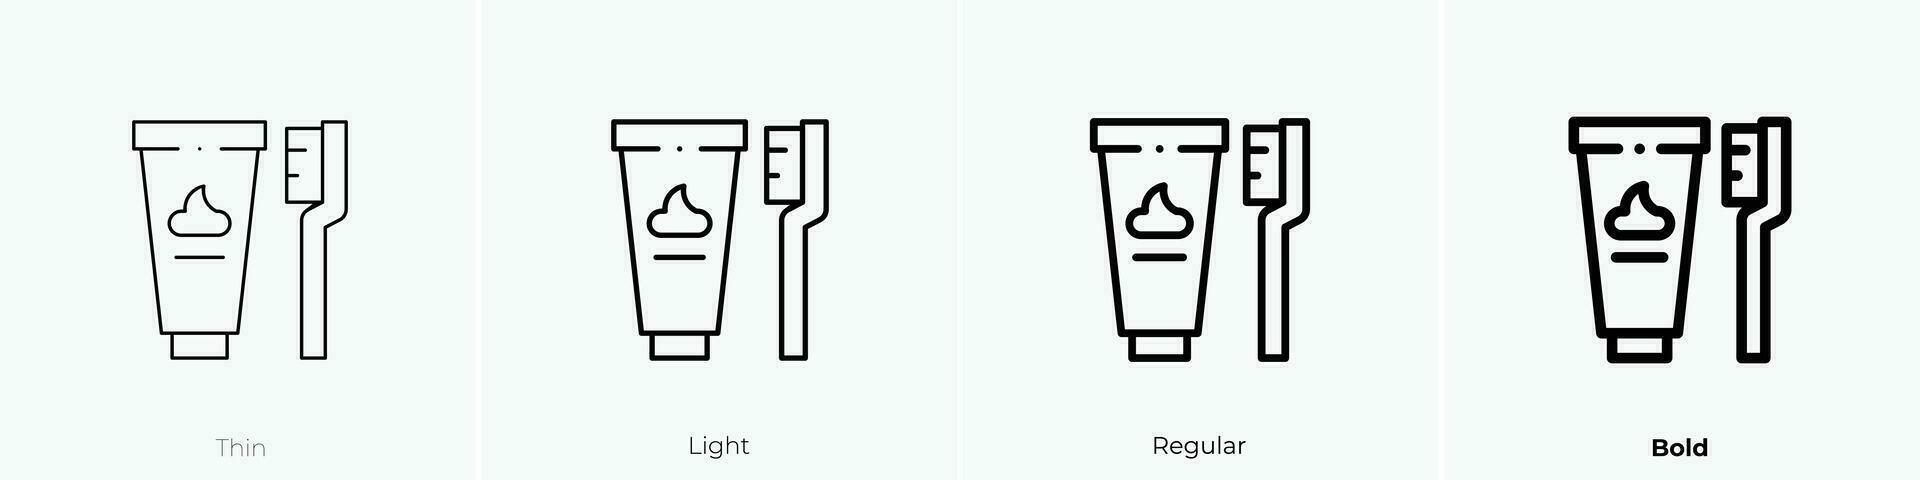 tooth hygiene icon. Thin, Light, Regular And Bold style design isolated on white background vector